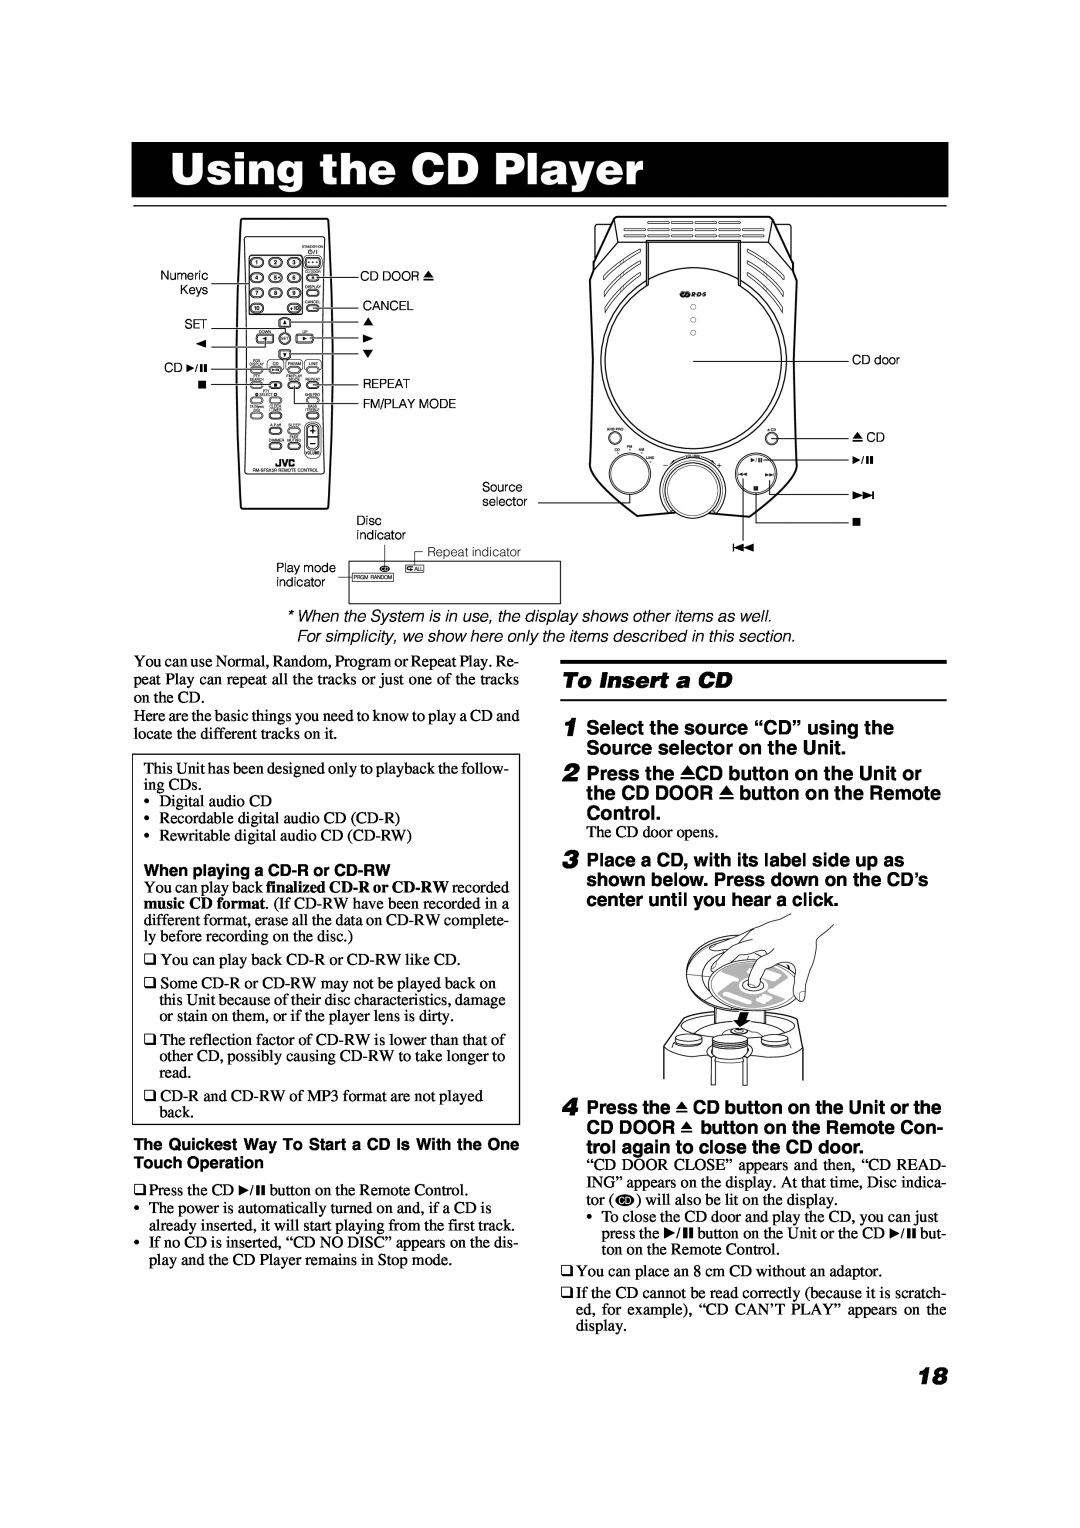 JVC LVT1040-003A manual Using the CD Player, To Insert a CD, Control 